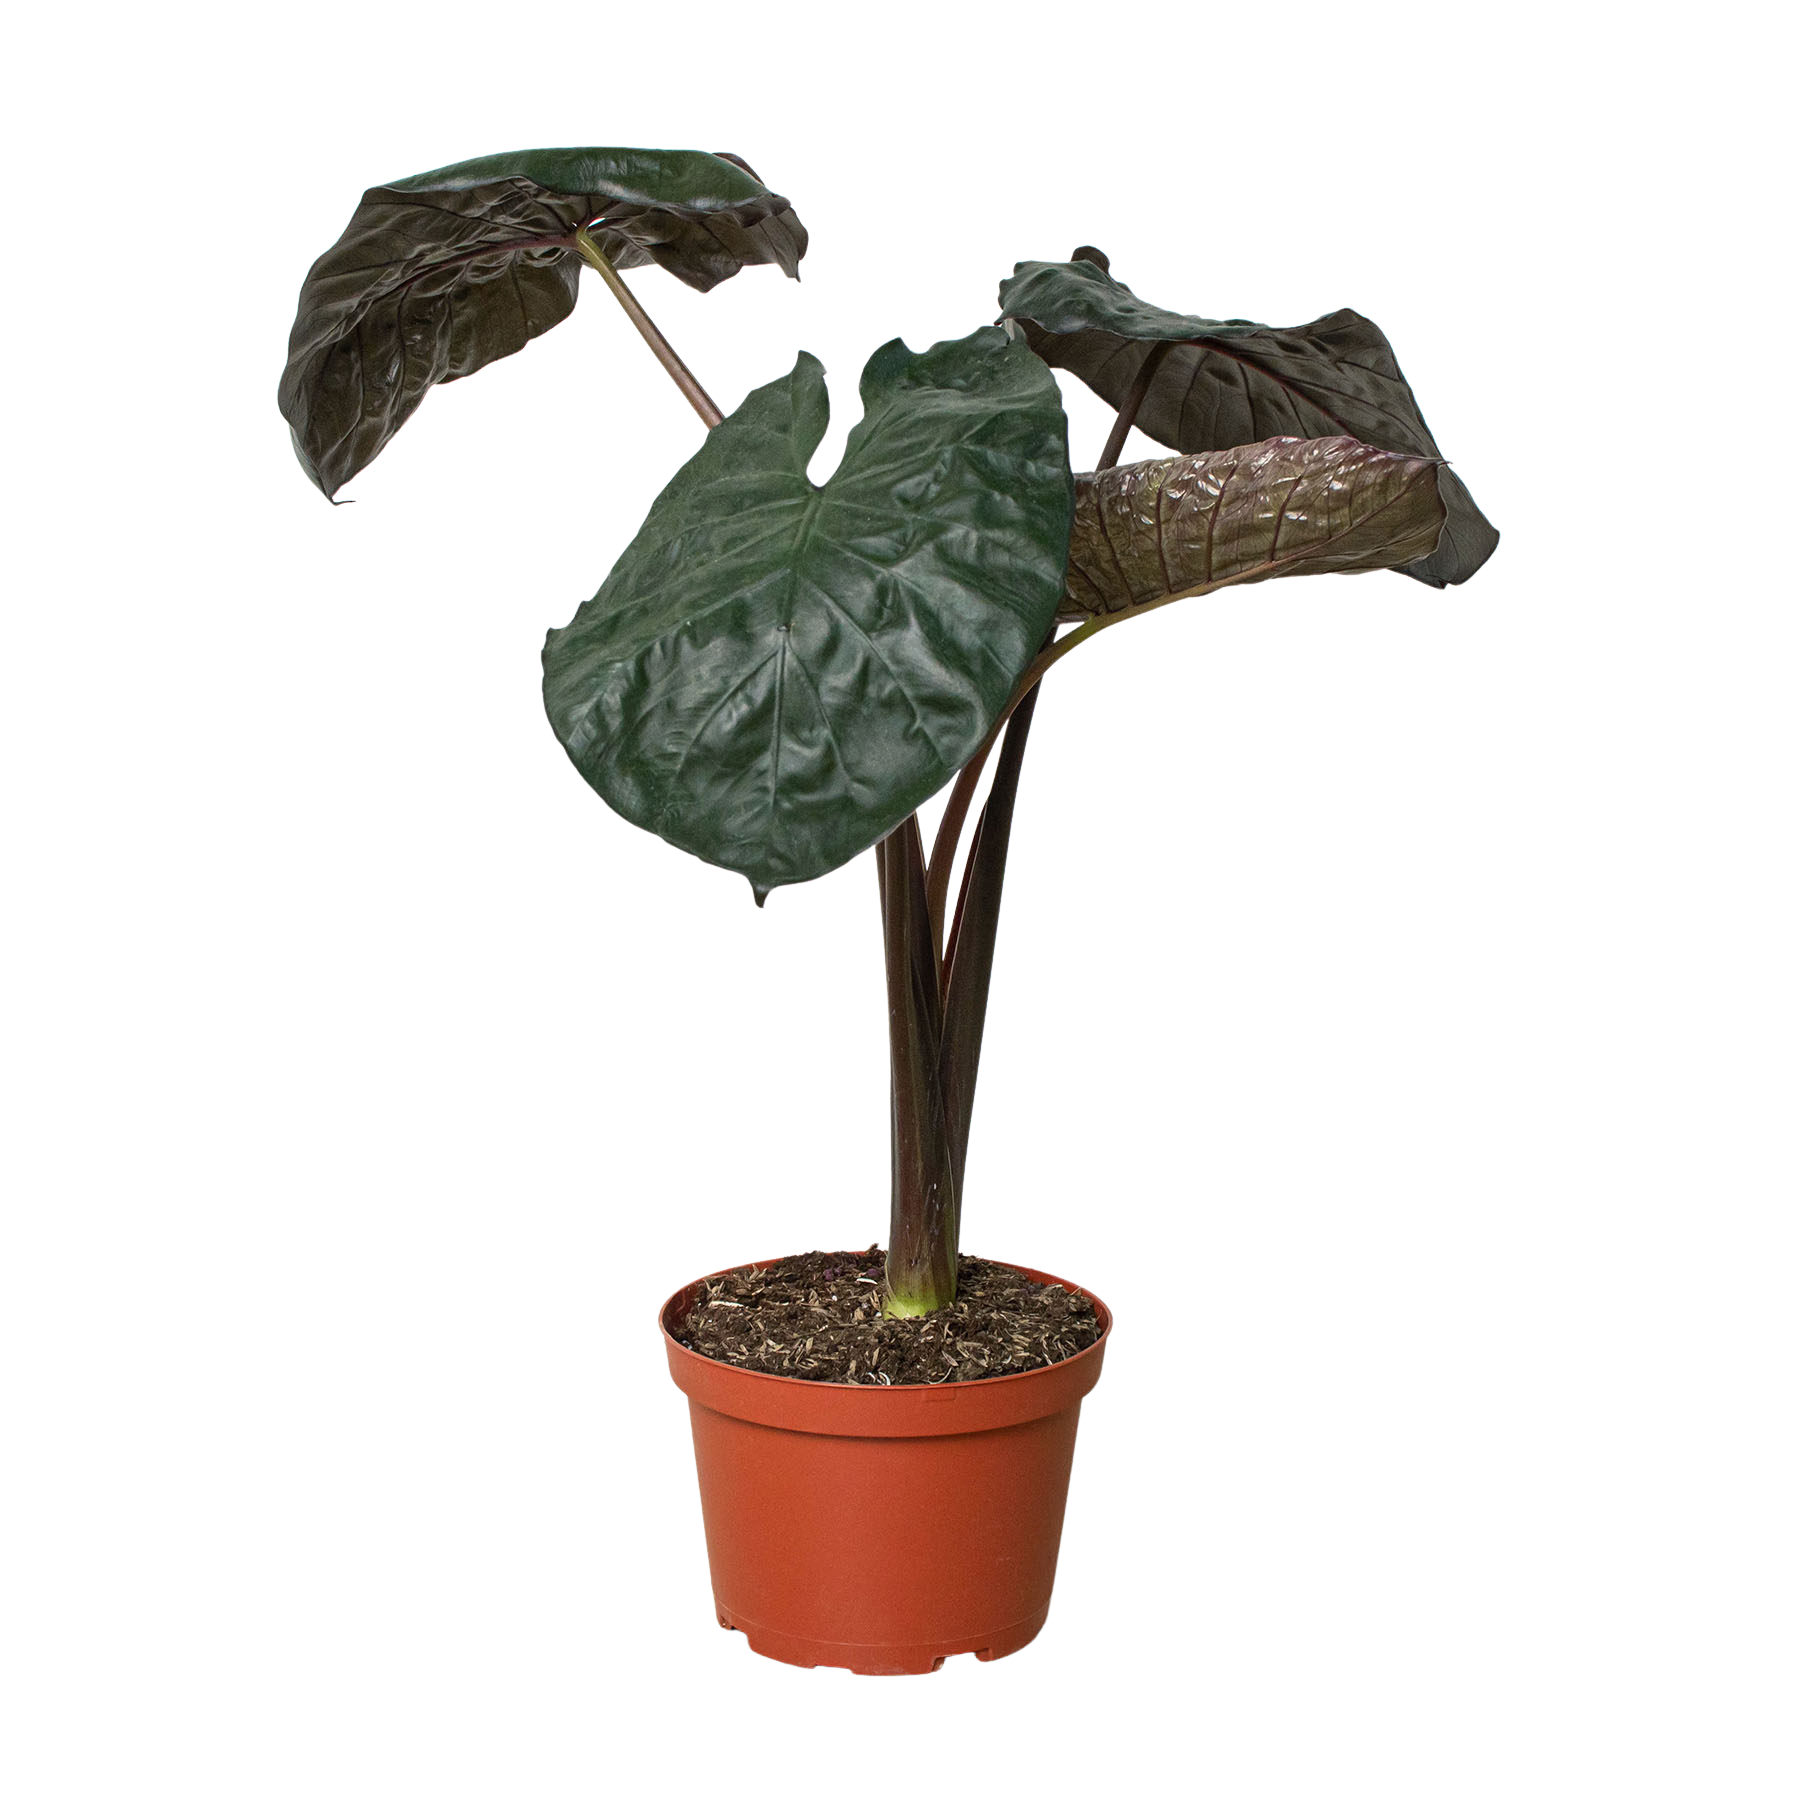 A top plant nursery offering a plant with large leaves in a pot displayed on a white background.